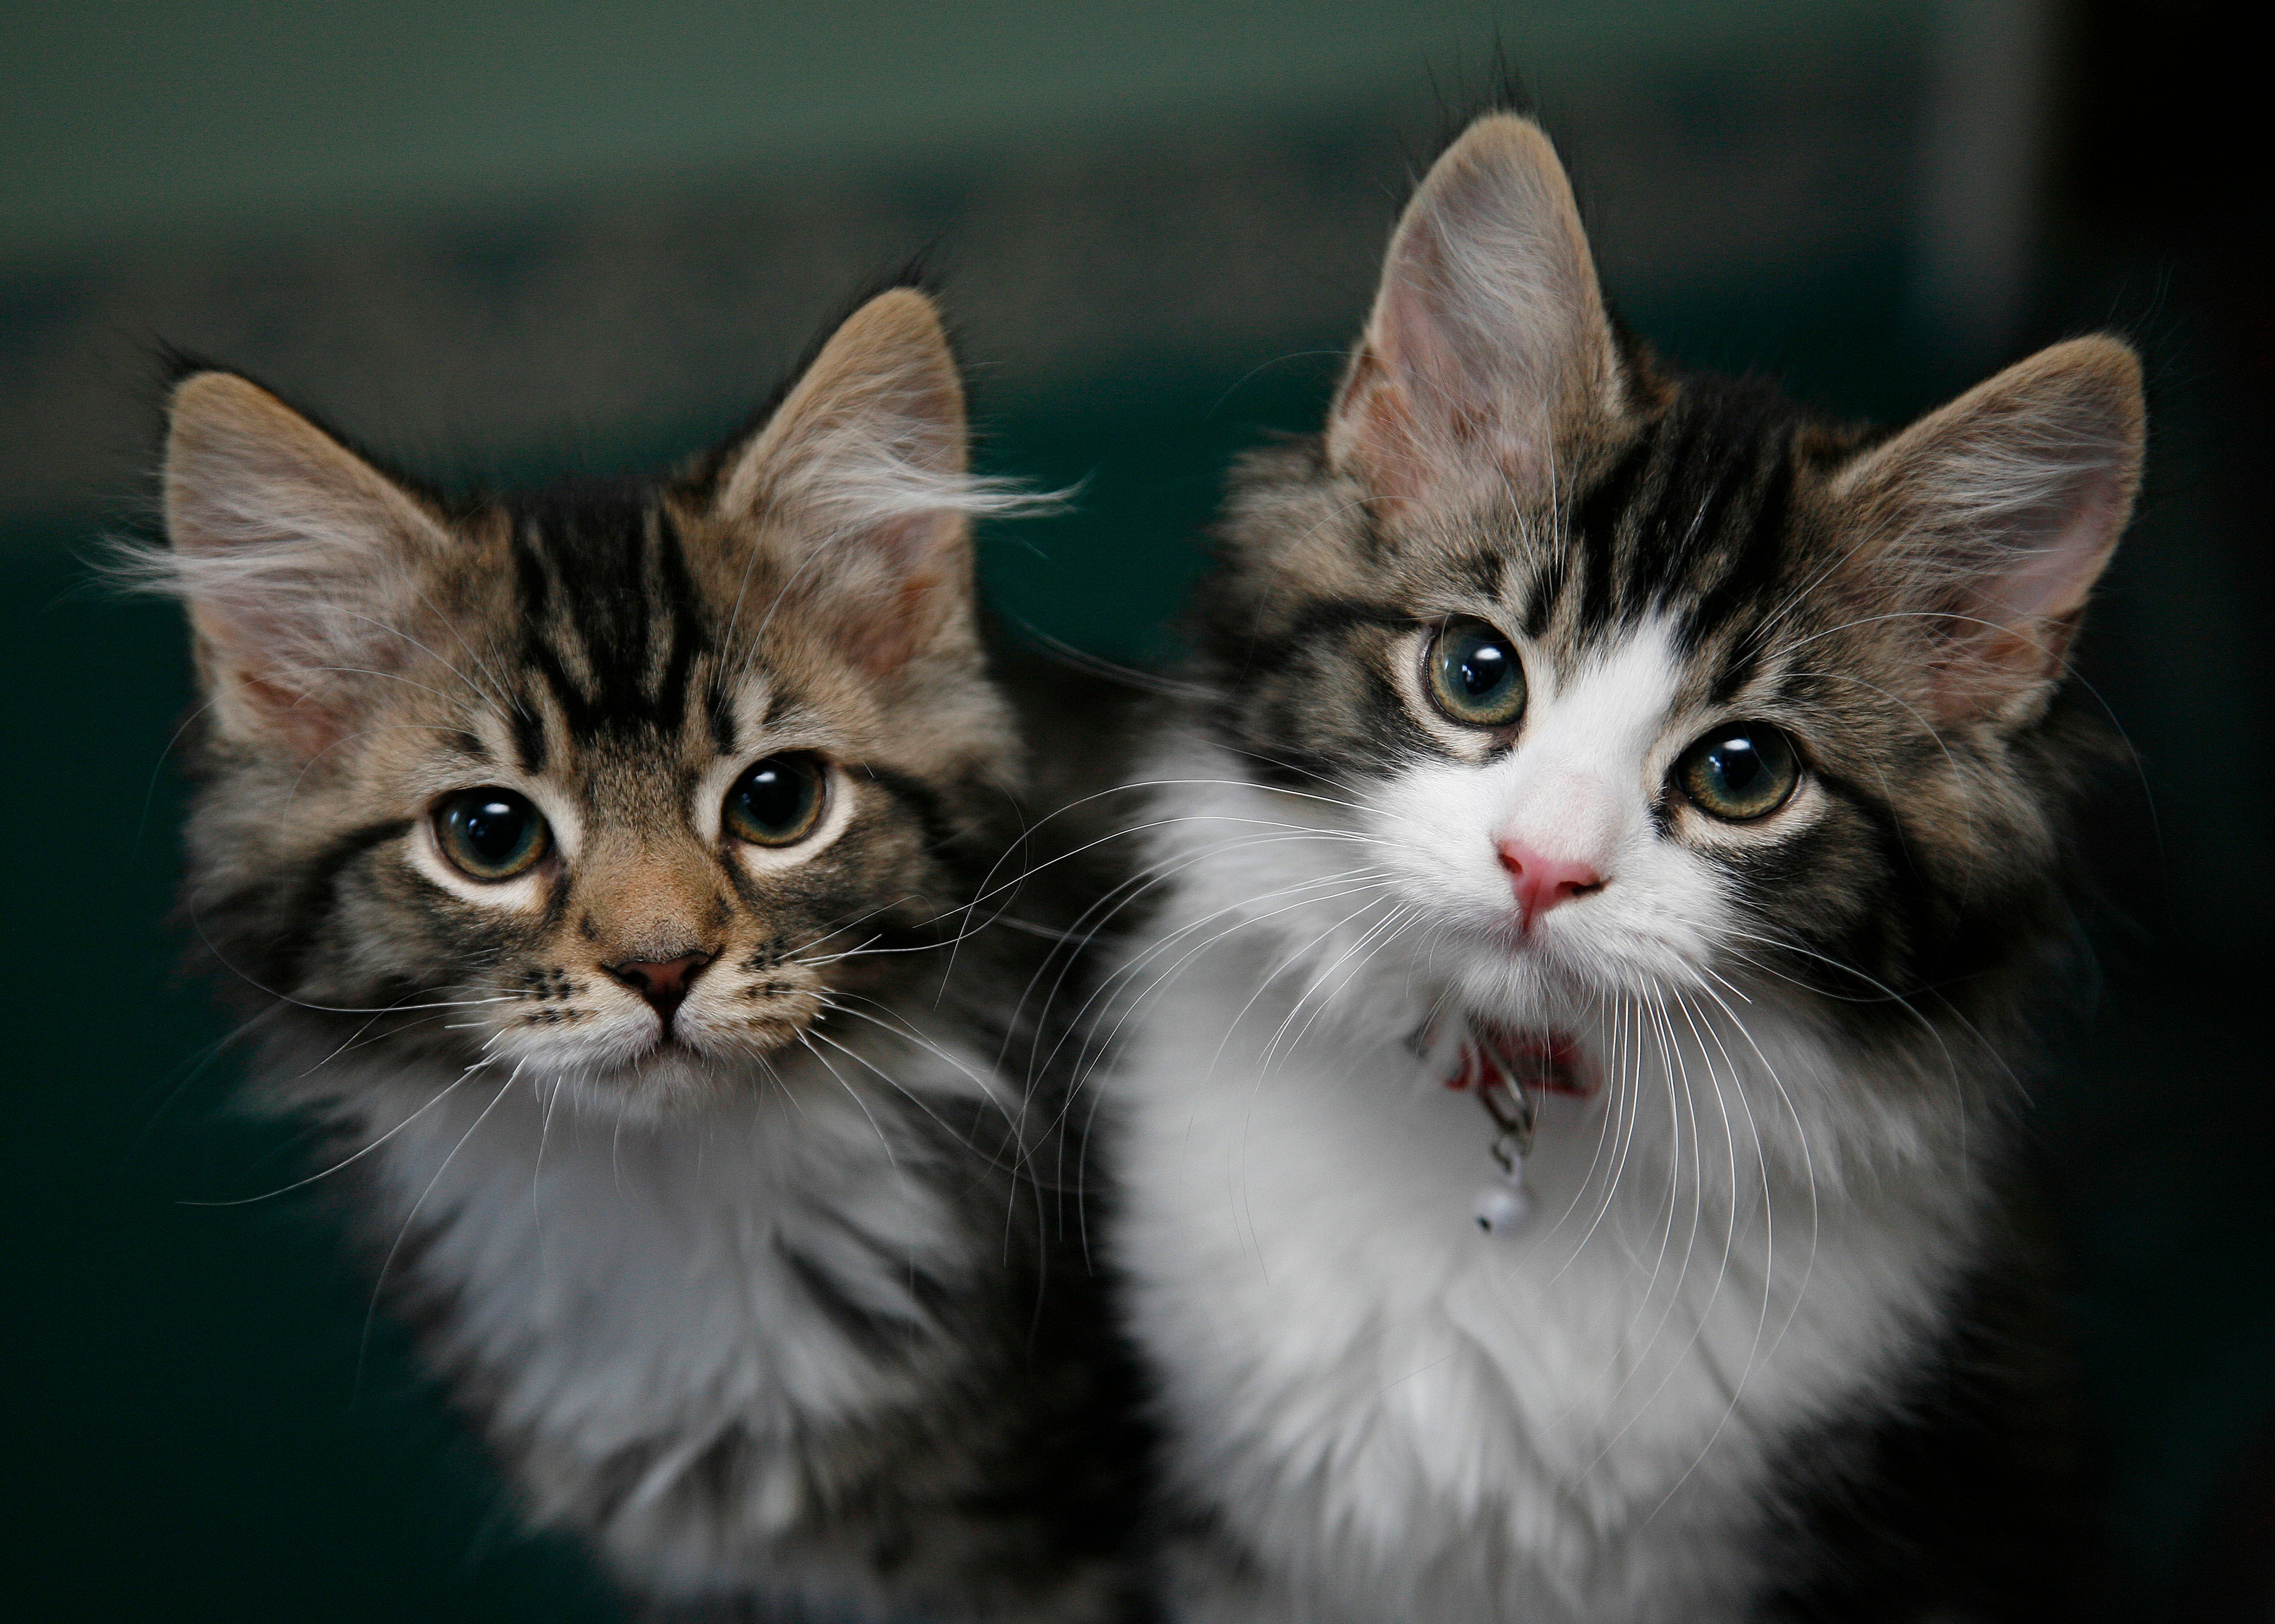 Pet insurers processed a record 1.03 million claims last year, according to industry figures (Nick Ansell/PA)